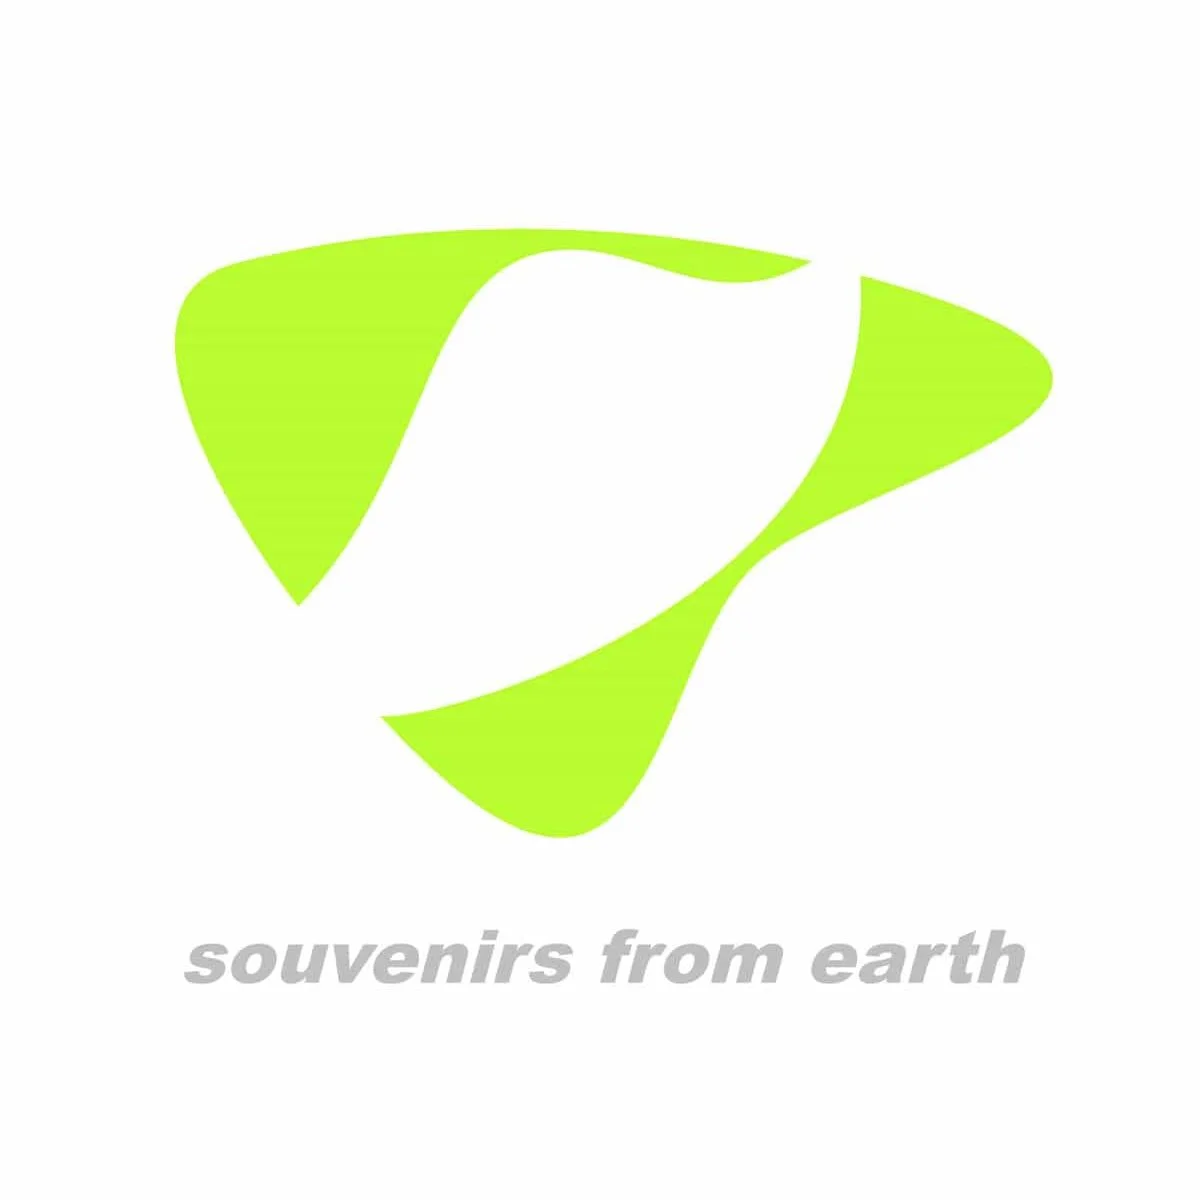 Souvenirs from Earth